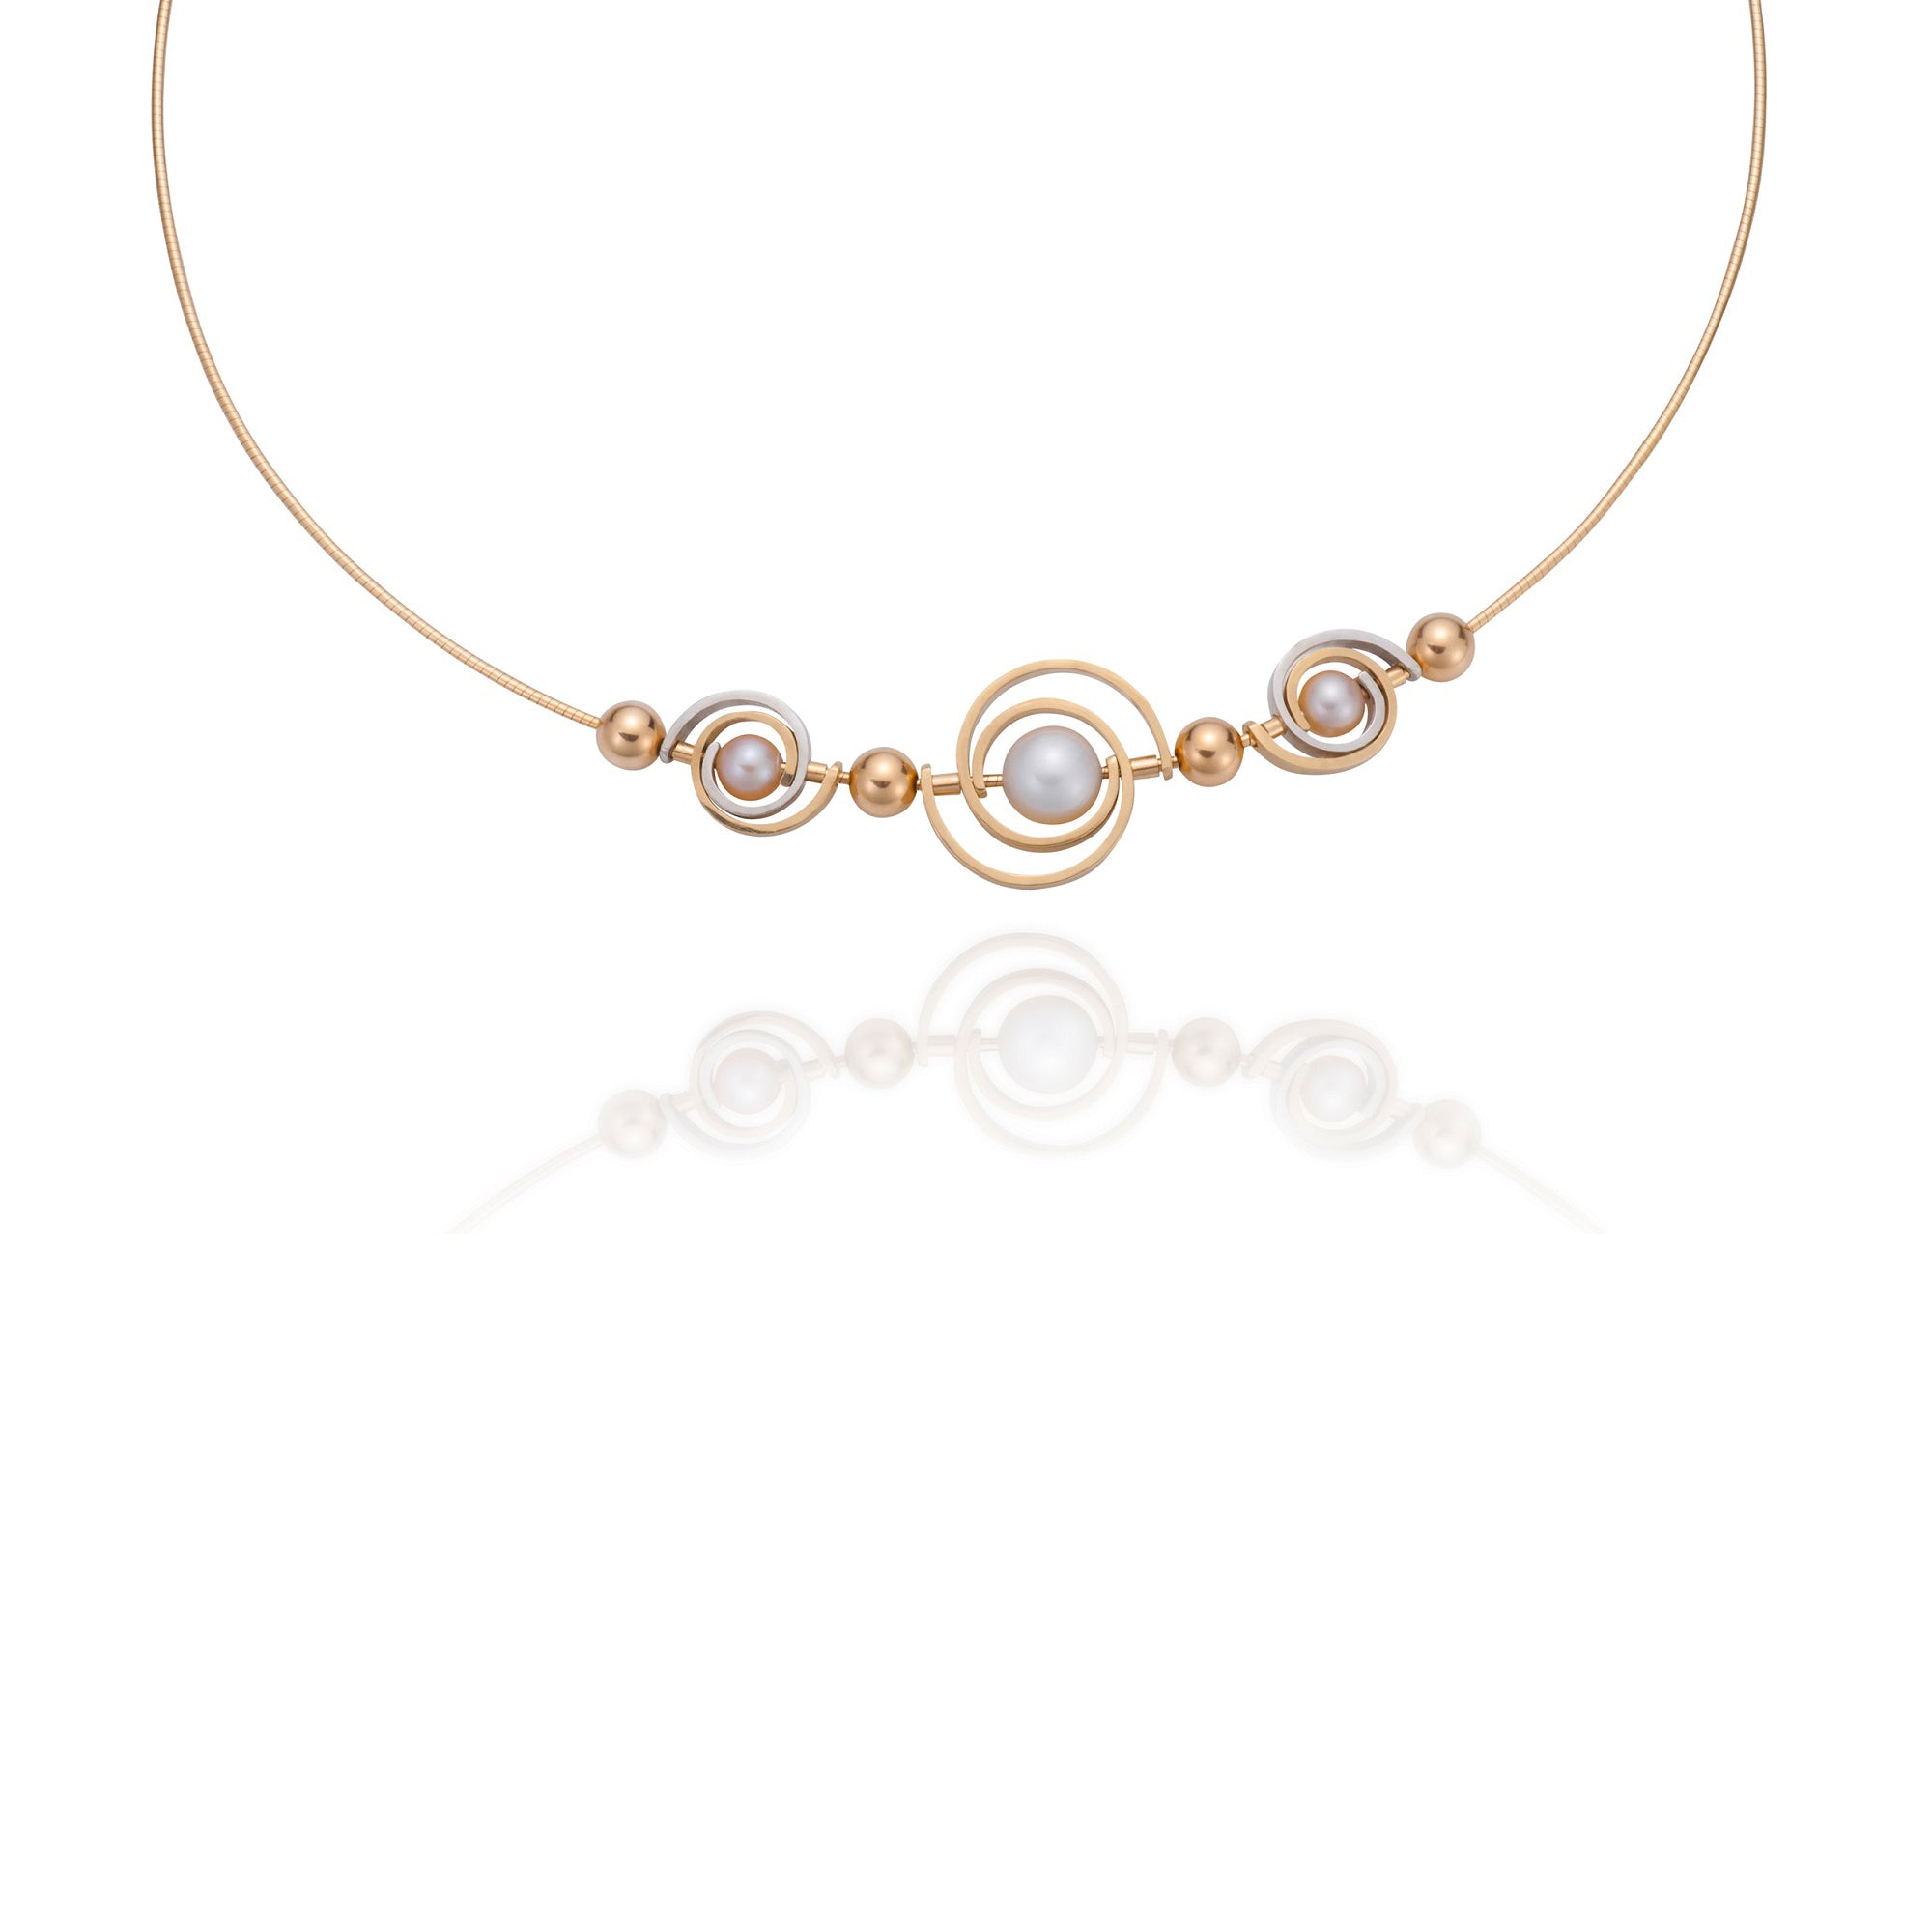 Triple Spiral Orbit Necklace by Martha Seely - Talisman Collection Fine Jewelers